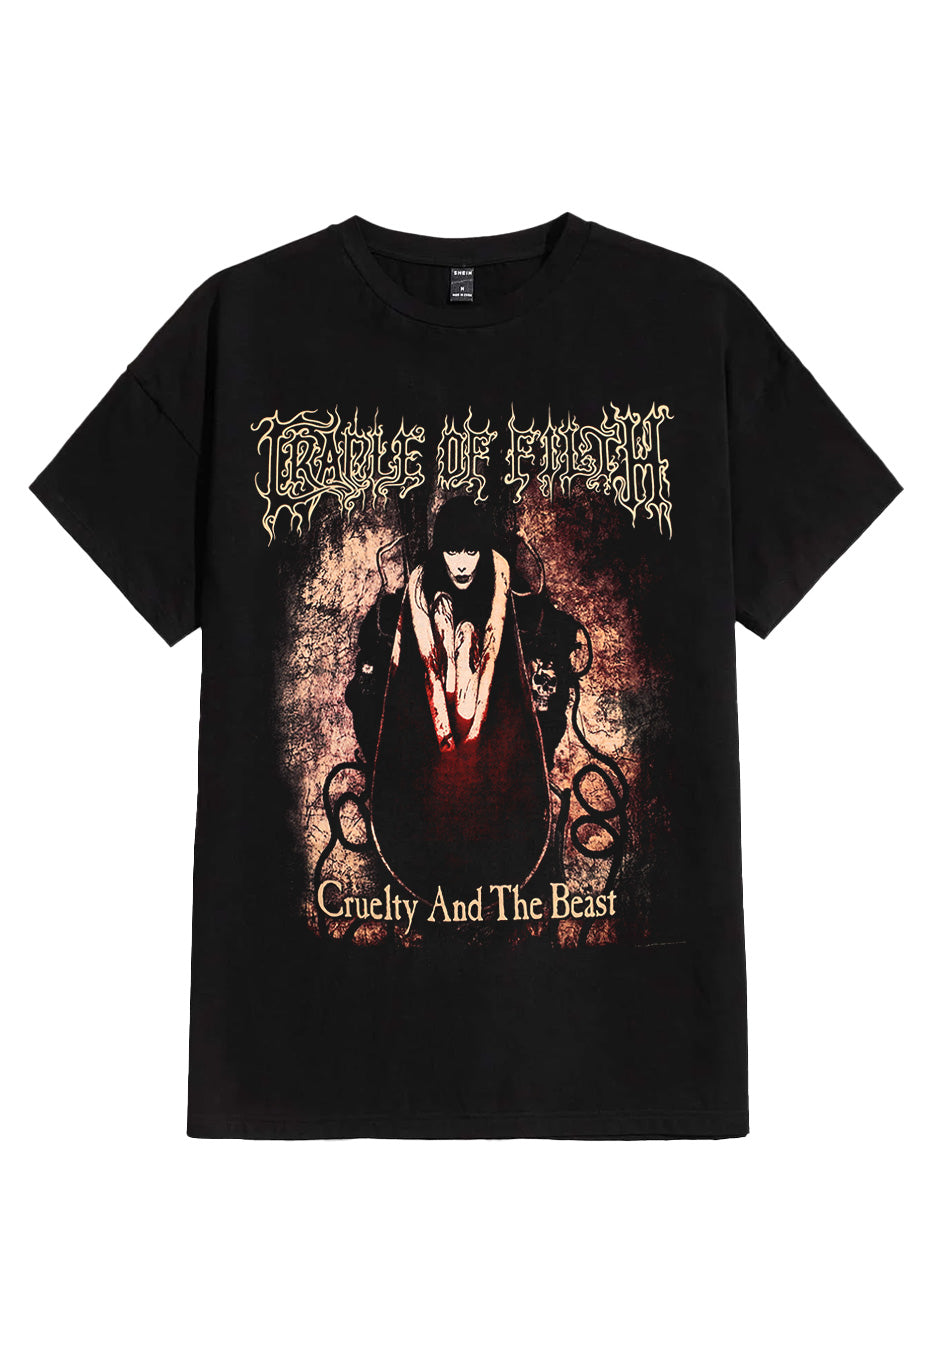 Cradle Of Filth - Cruelty And The Beast - T-Shirt